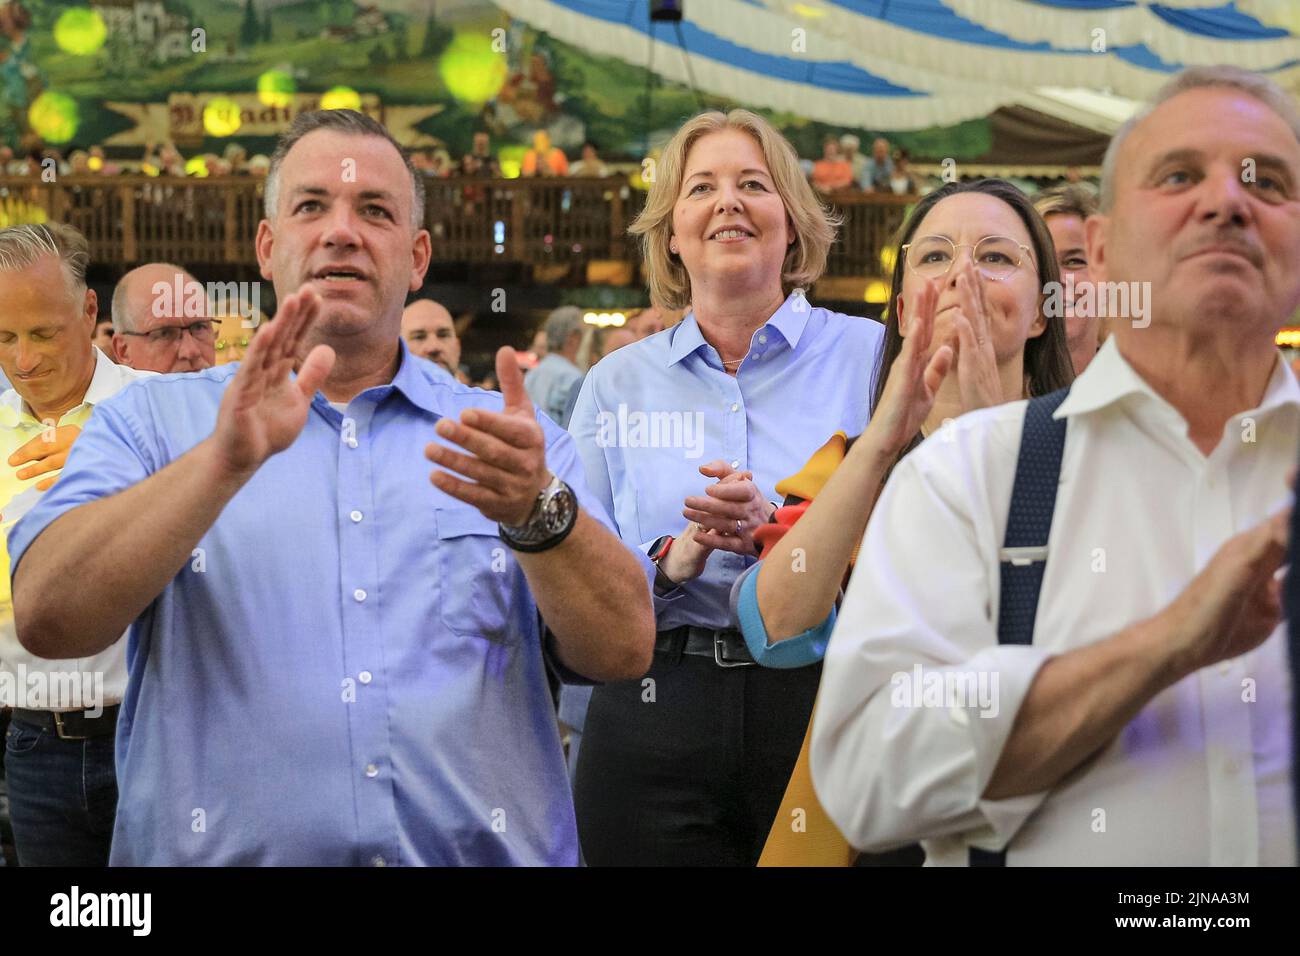 President of the German Parliament, Bärbel Bas (middle) claps and celebrates with others at the opening of Cranger Kirmes, Herne, Germany Stock Photo